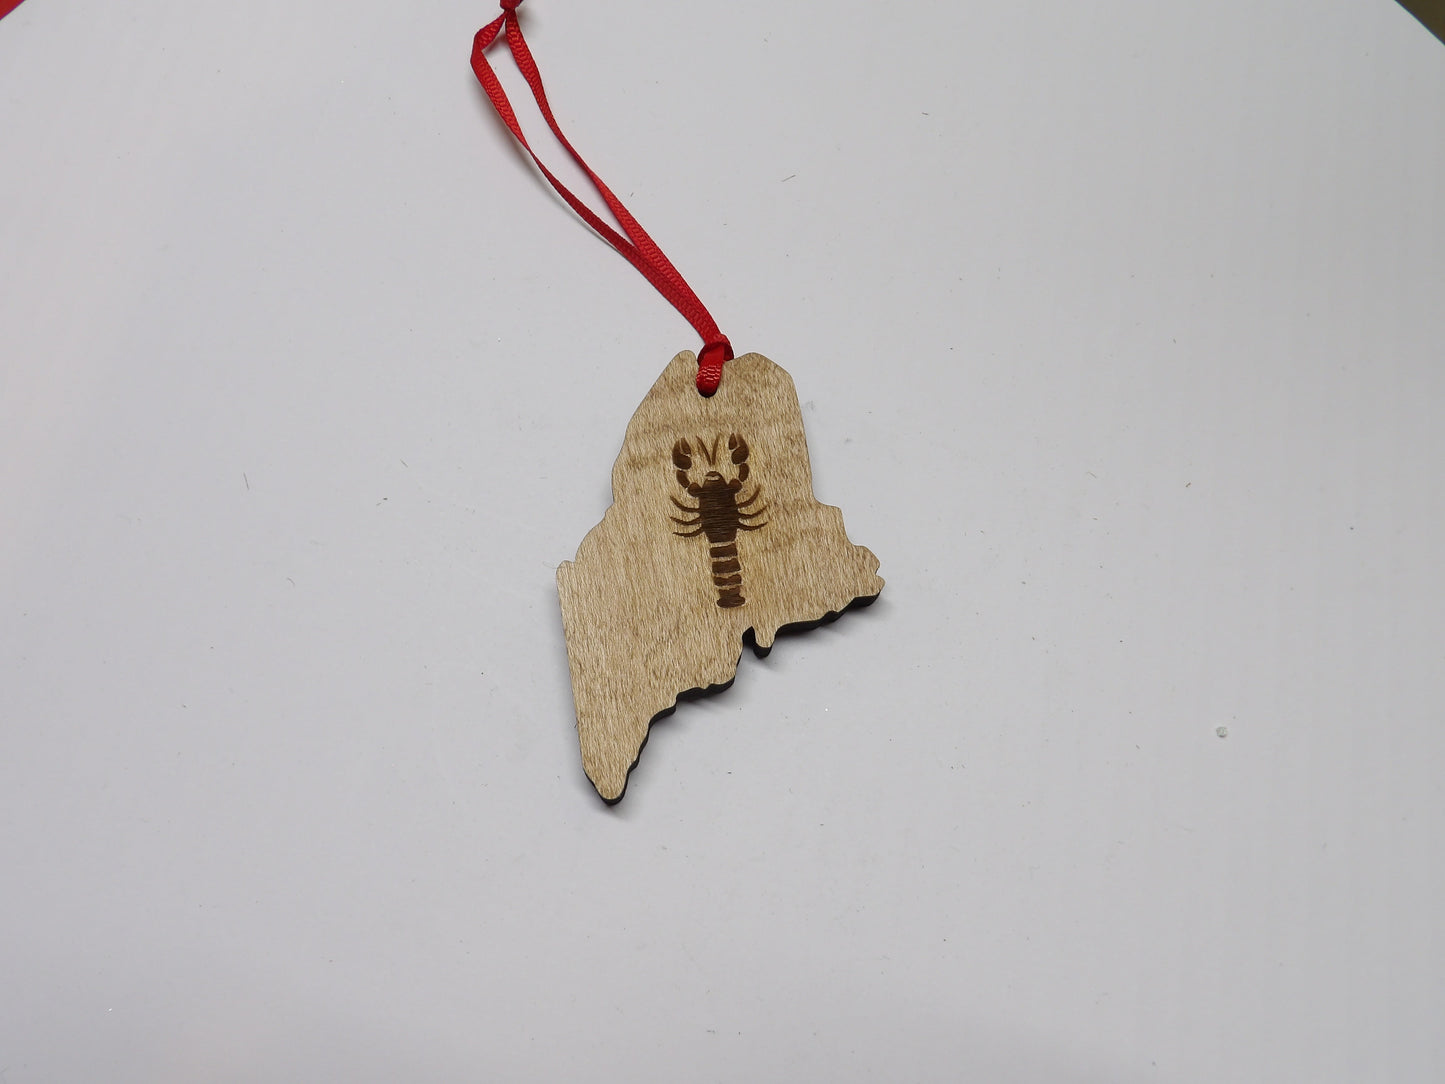 State of Maine Lobster Wooden Christmas Tree Ornament